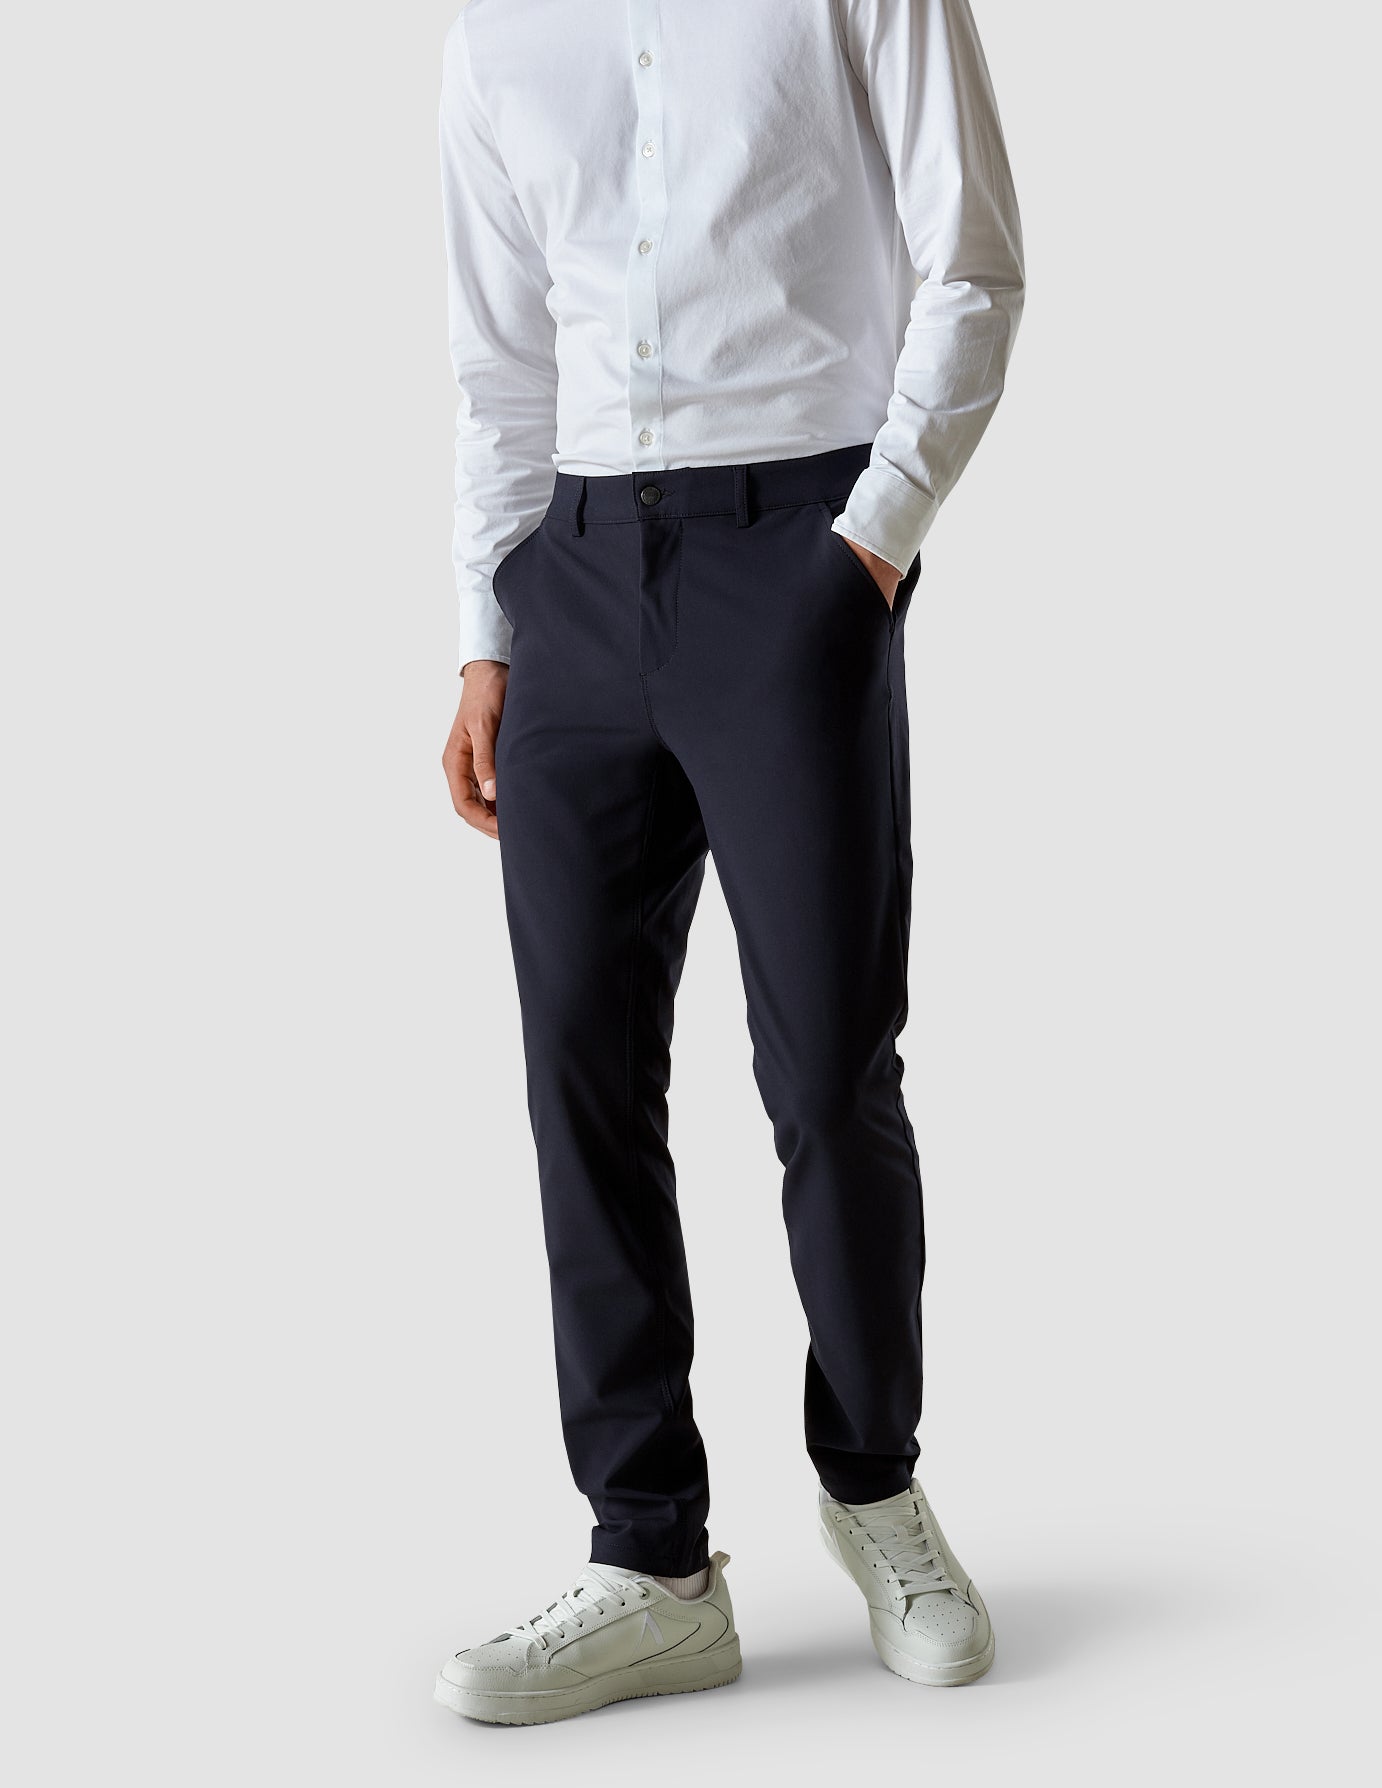 JNGSA Suit Pants for Men New Casual Daily Holiday formal New Business Men  Slim Straight Trousers Men's Suit Pants Men West Dress Pants Regular Fit  Sky Blue Clearance - Walmart.com